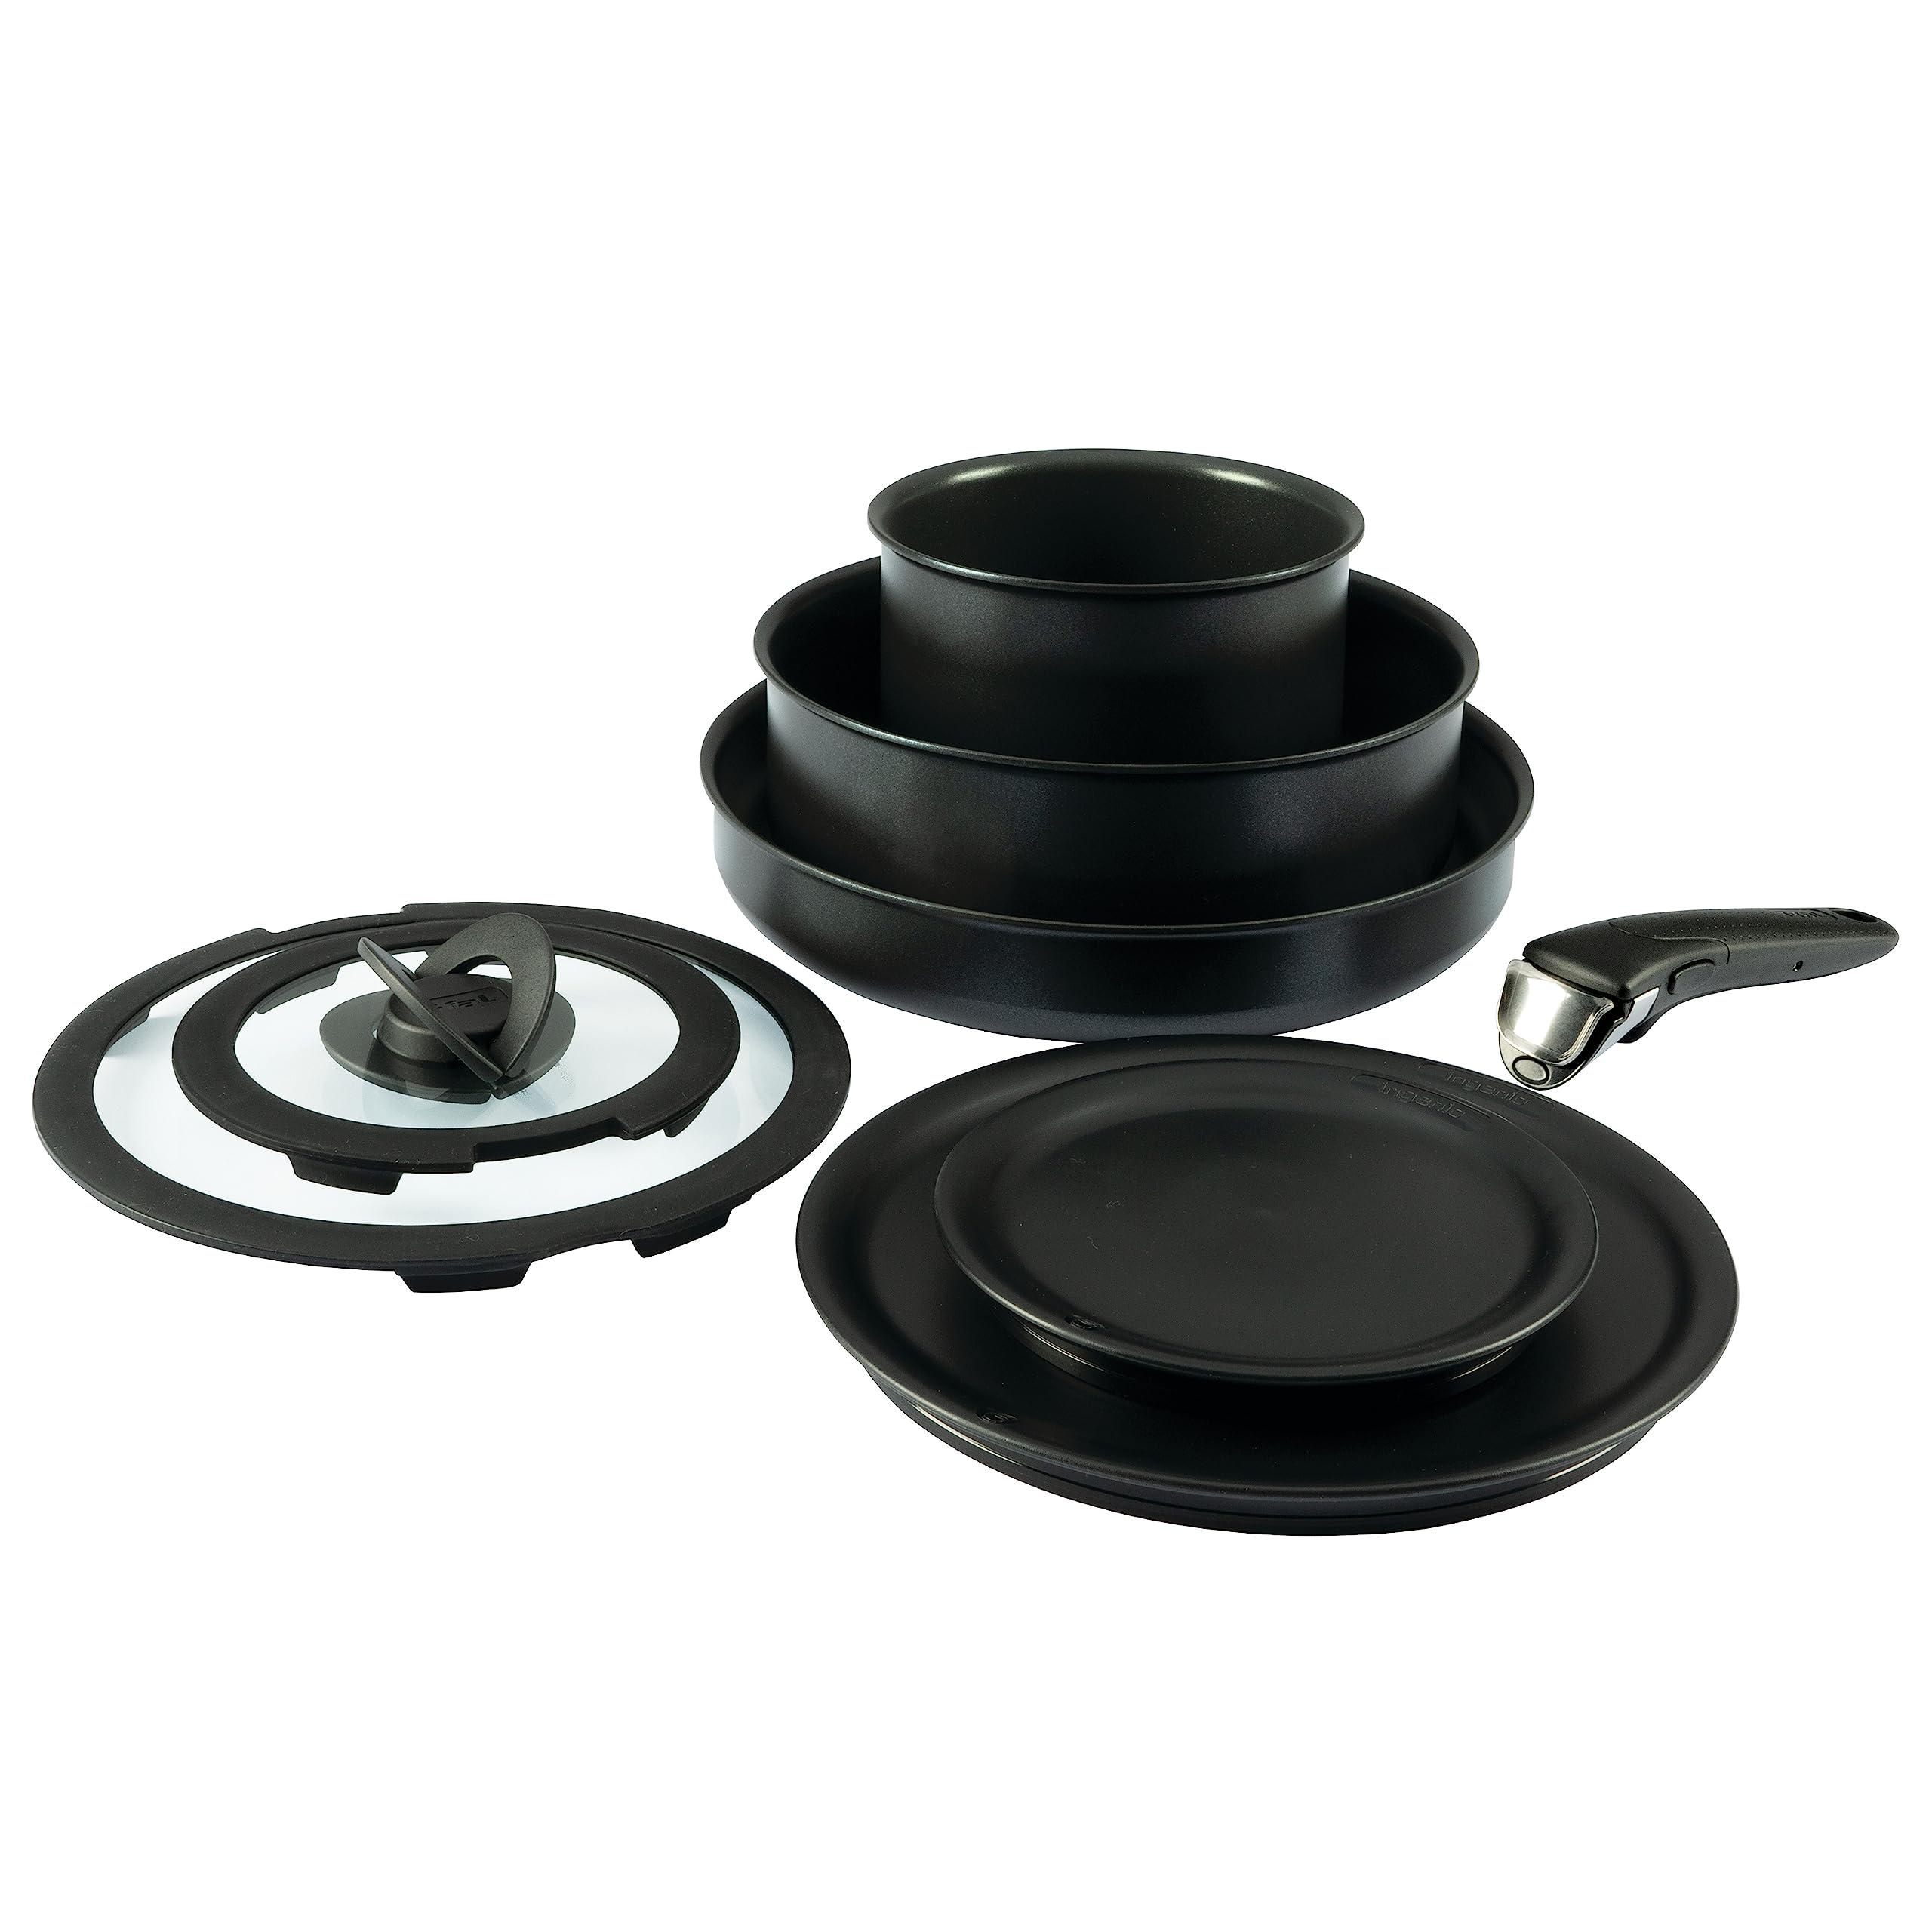 t-fal ingenio nonstick cookware set 8 piece induction stackable, detachable handle, removable handle, rv cookware, cookware, 